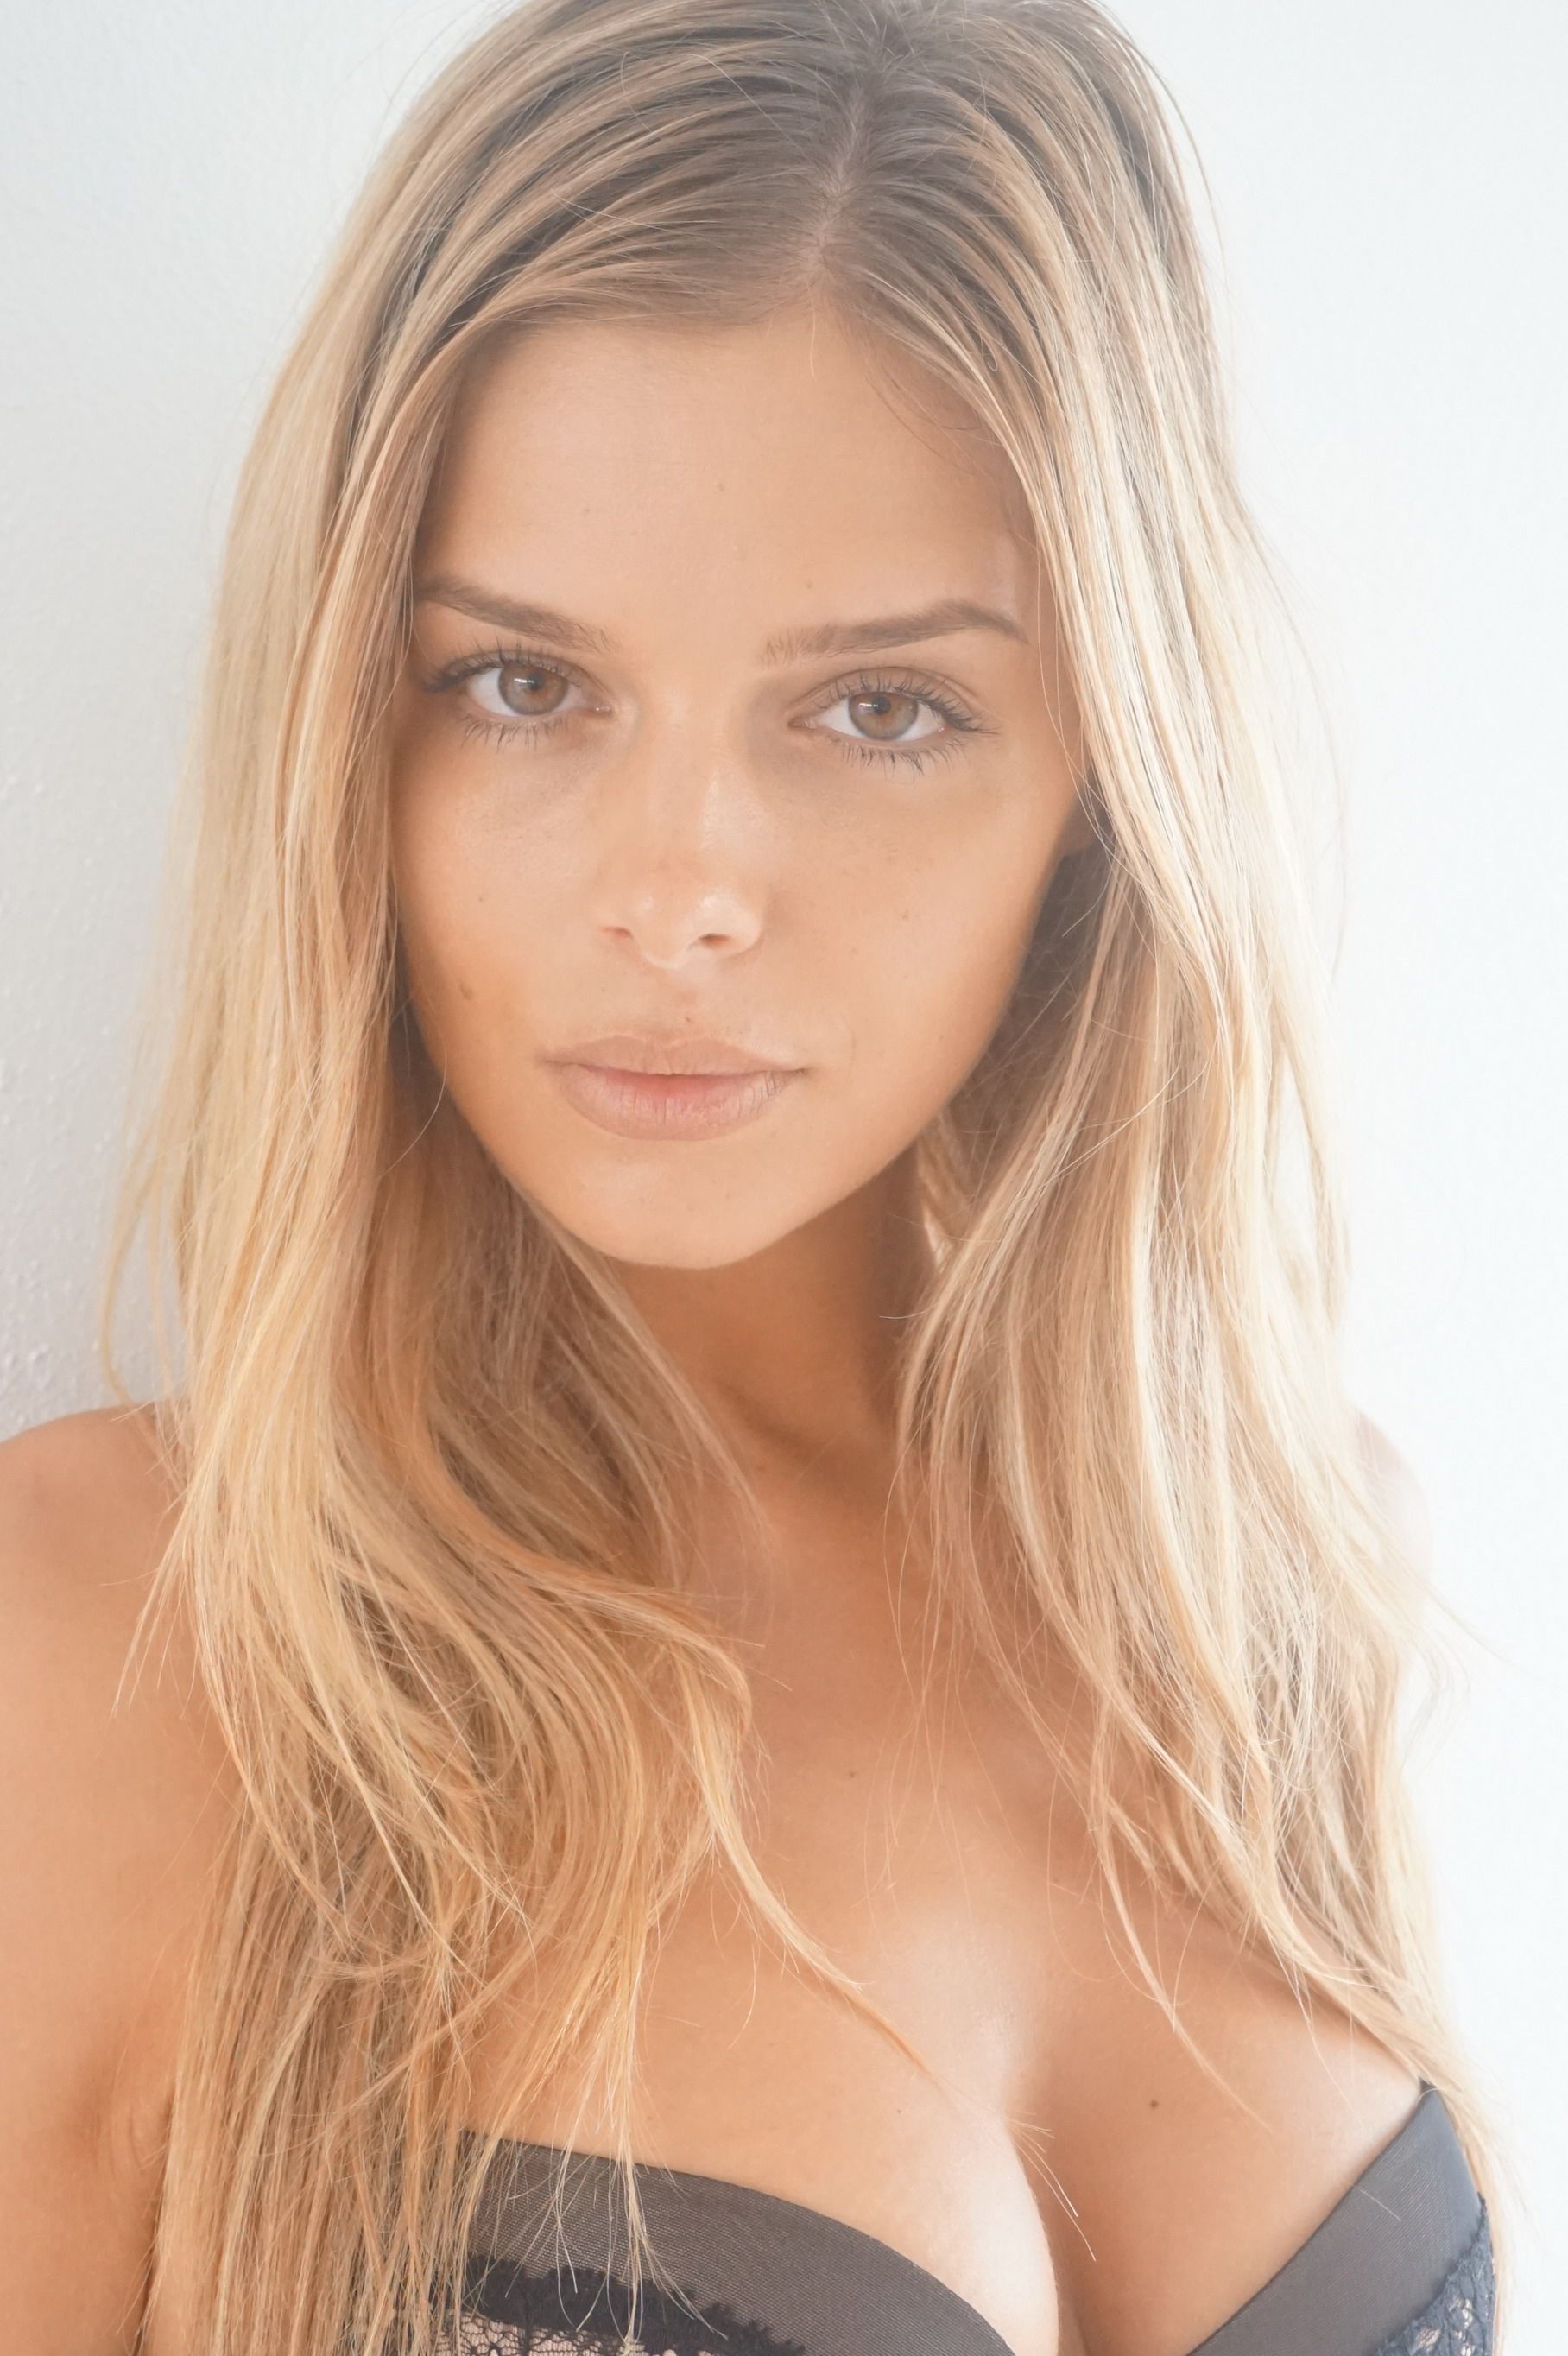 1677774740 985 Danielle Knudson Nude TheFappening 240 - Danielle Knudson Nude Leaked (Over 200 Photos!)